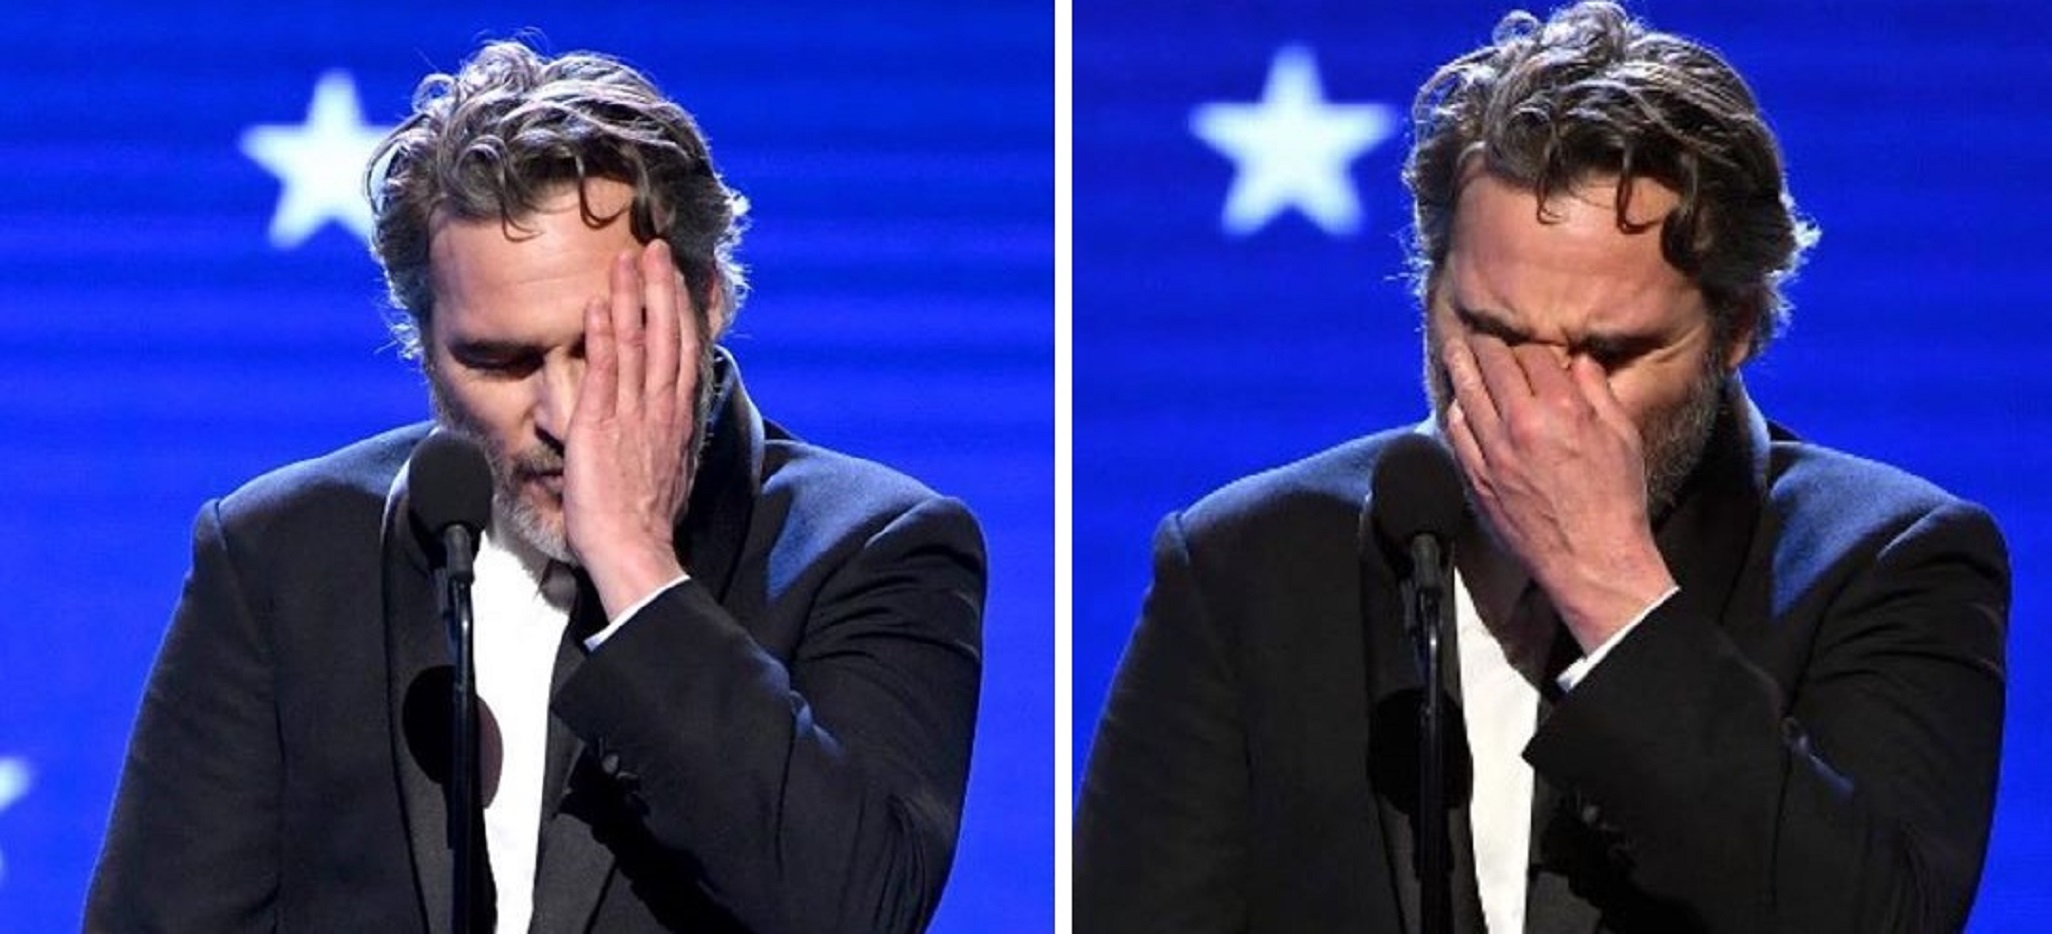 Accepting Critics’ Choice ‘Best Actor’ Award, Joaquin Phoenix Thanked His Mother for Not Giving Up on Him